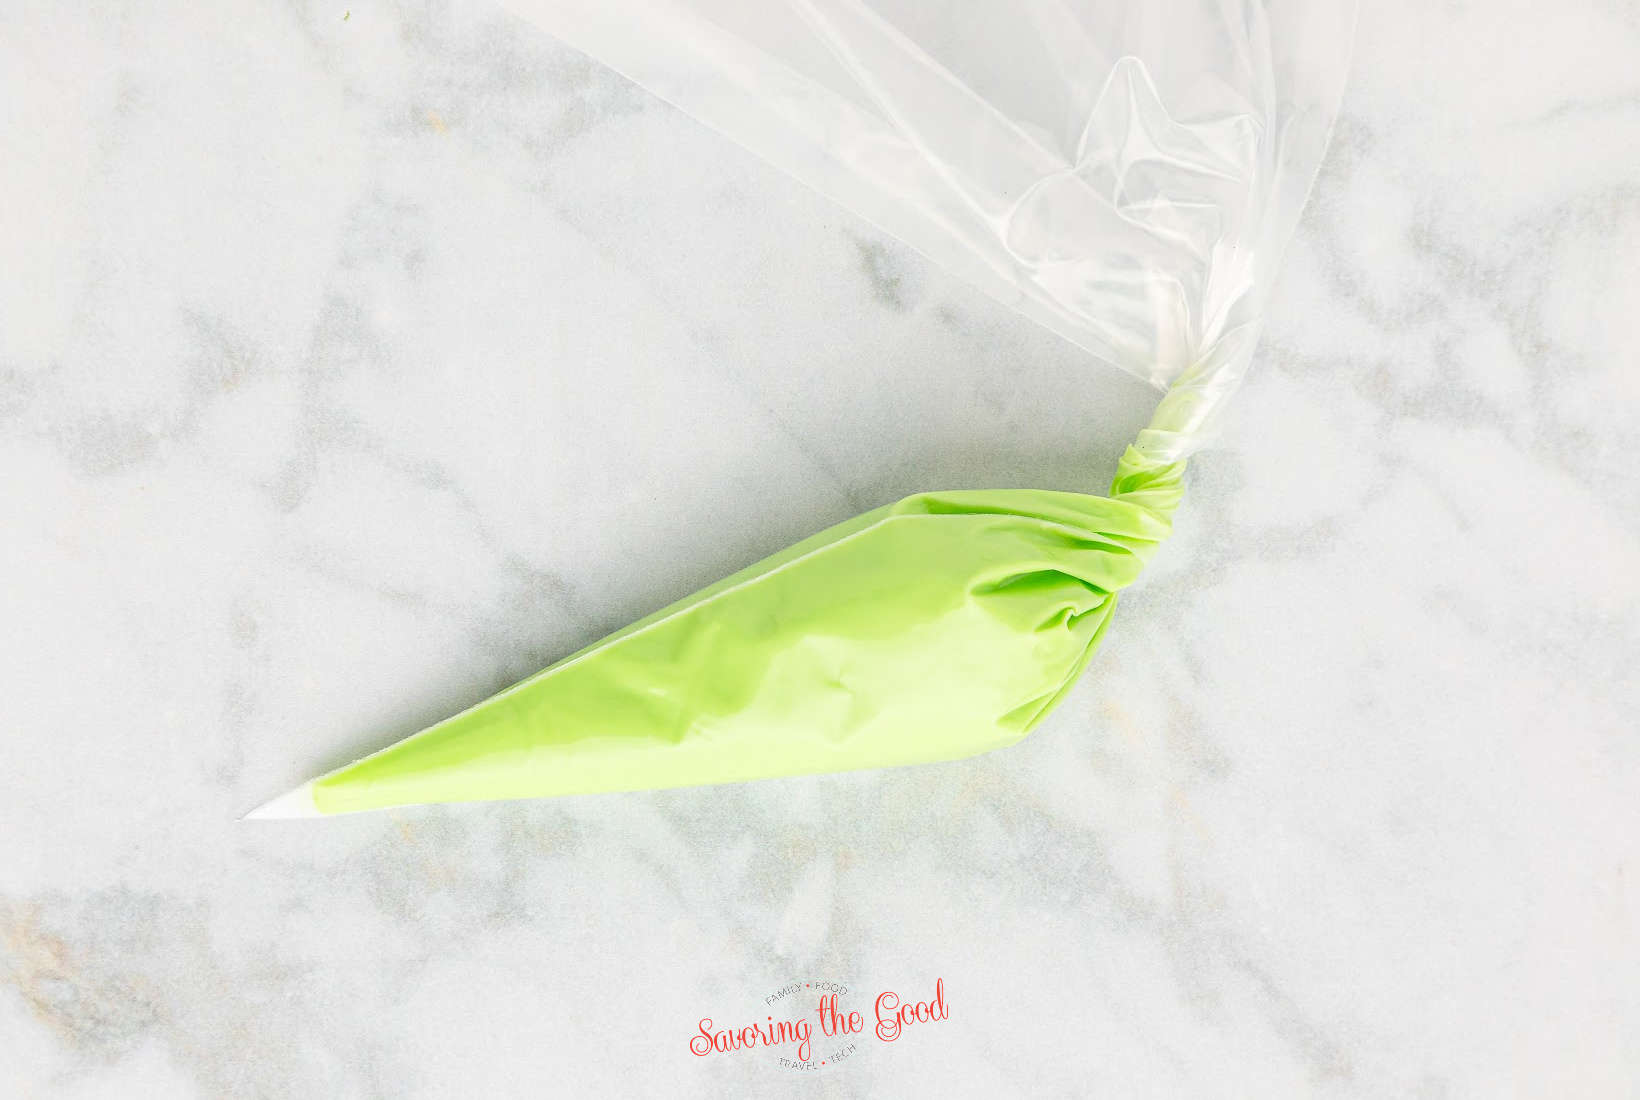 A green plastic cone on a marble table.